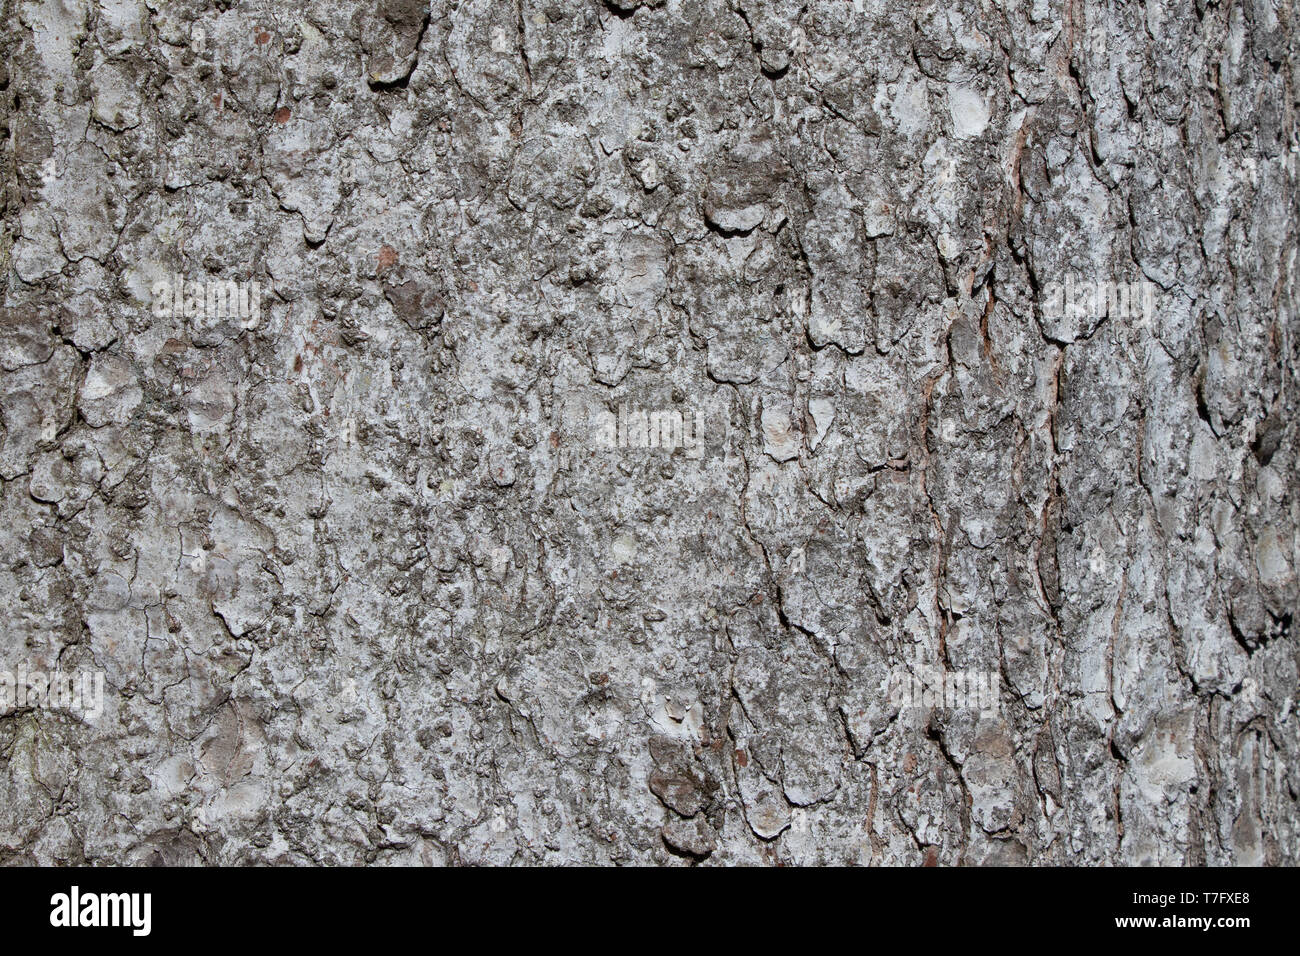 Tree bark texture of Picea abies or European spruce with beautiful rough pattern Stock Photo